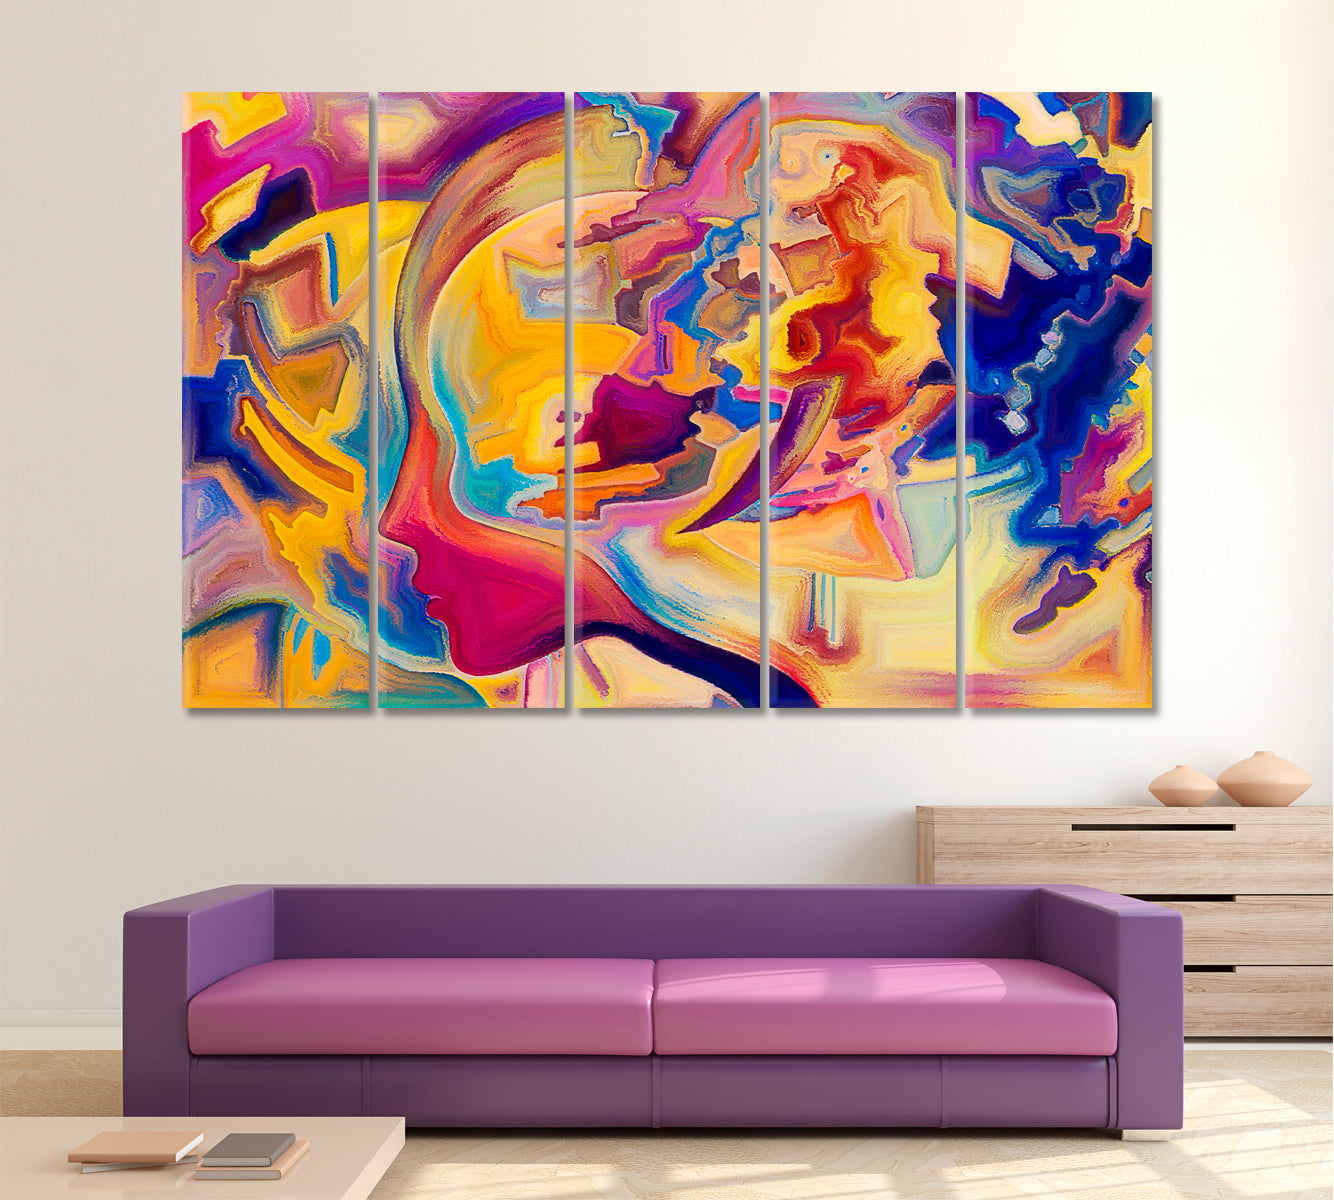 Colors In Us Colorful Elements And Human Profile Abstract Art Print Artesty 5 panels 36" x 24" 